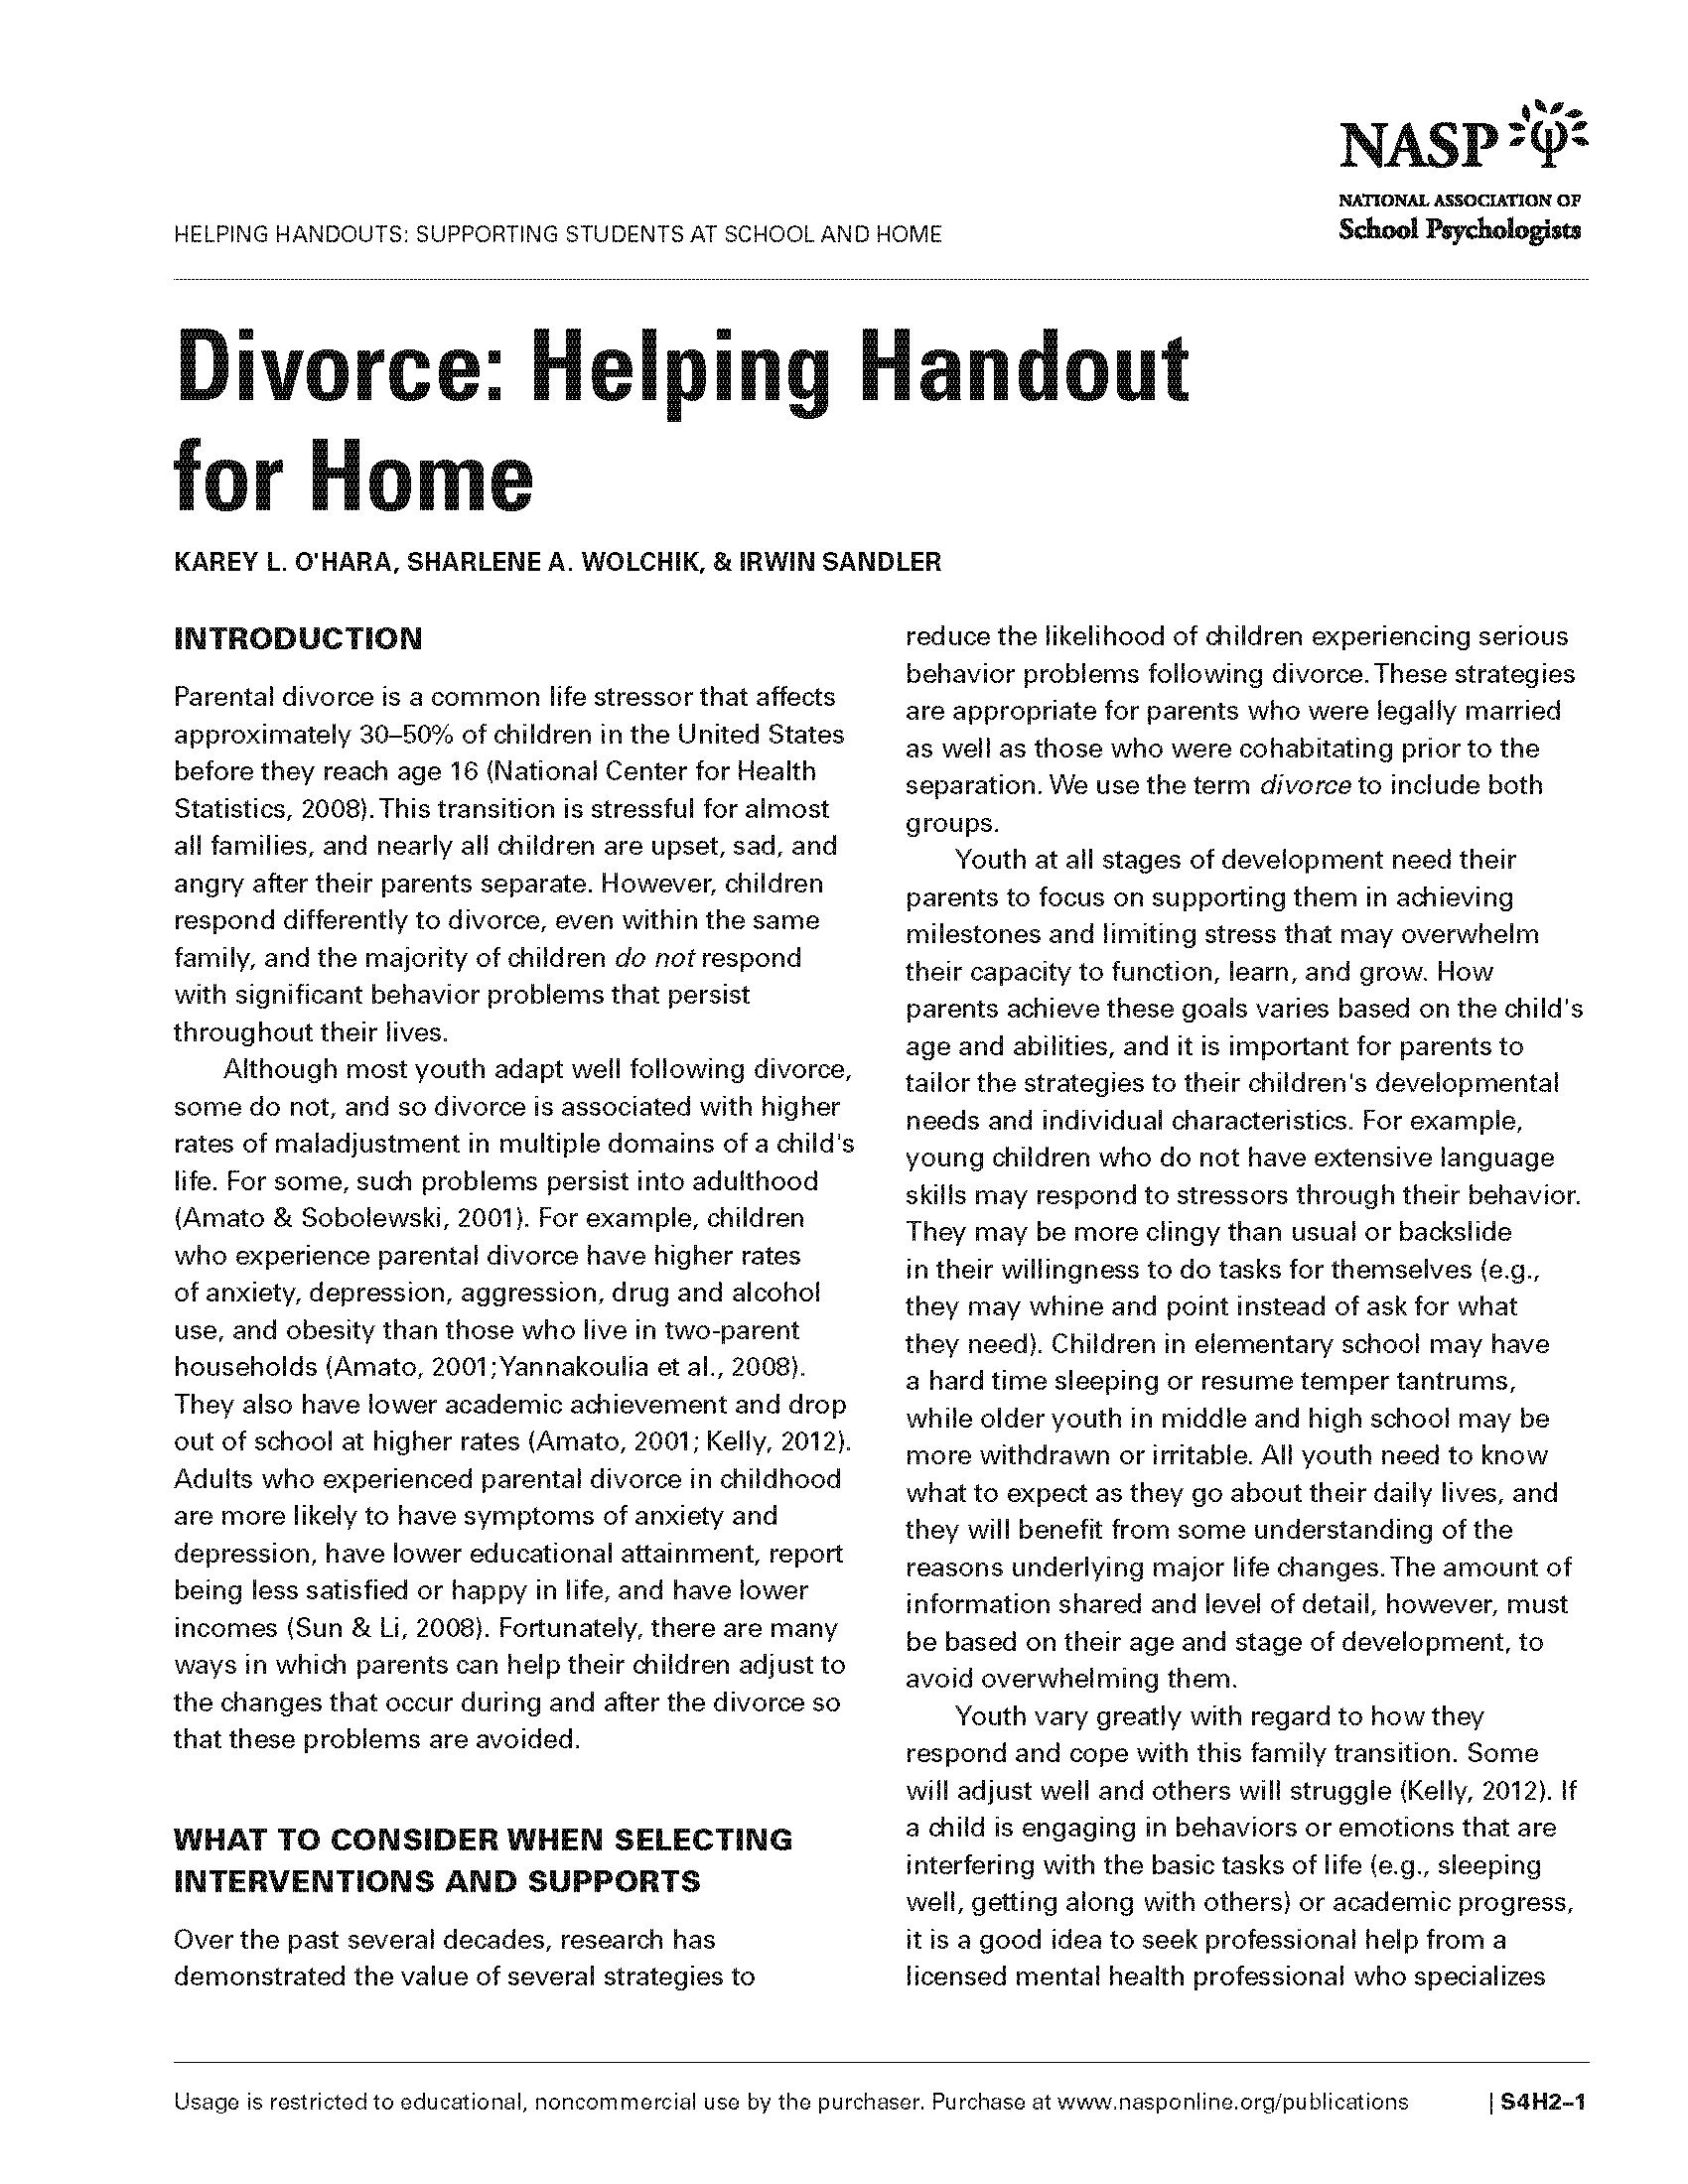 Divorce: Helping Handout for Home 